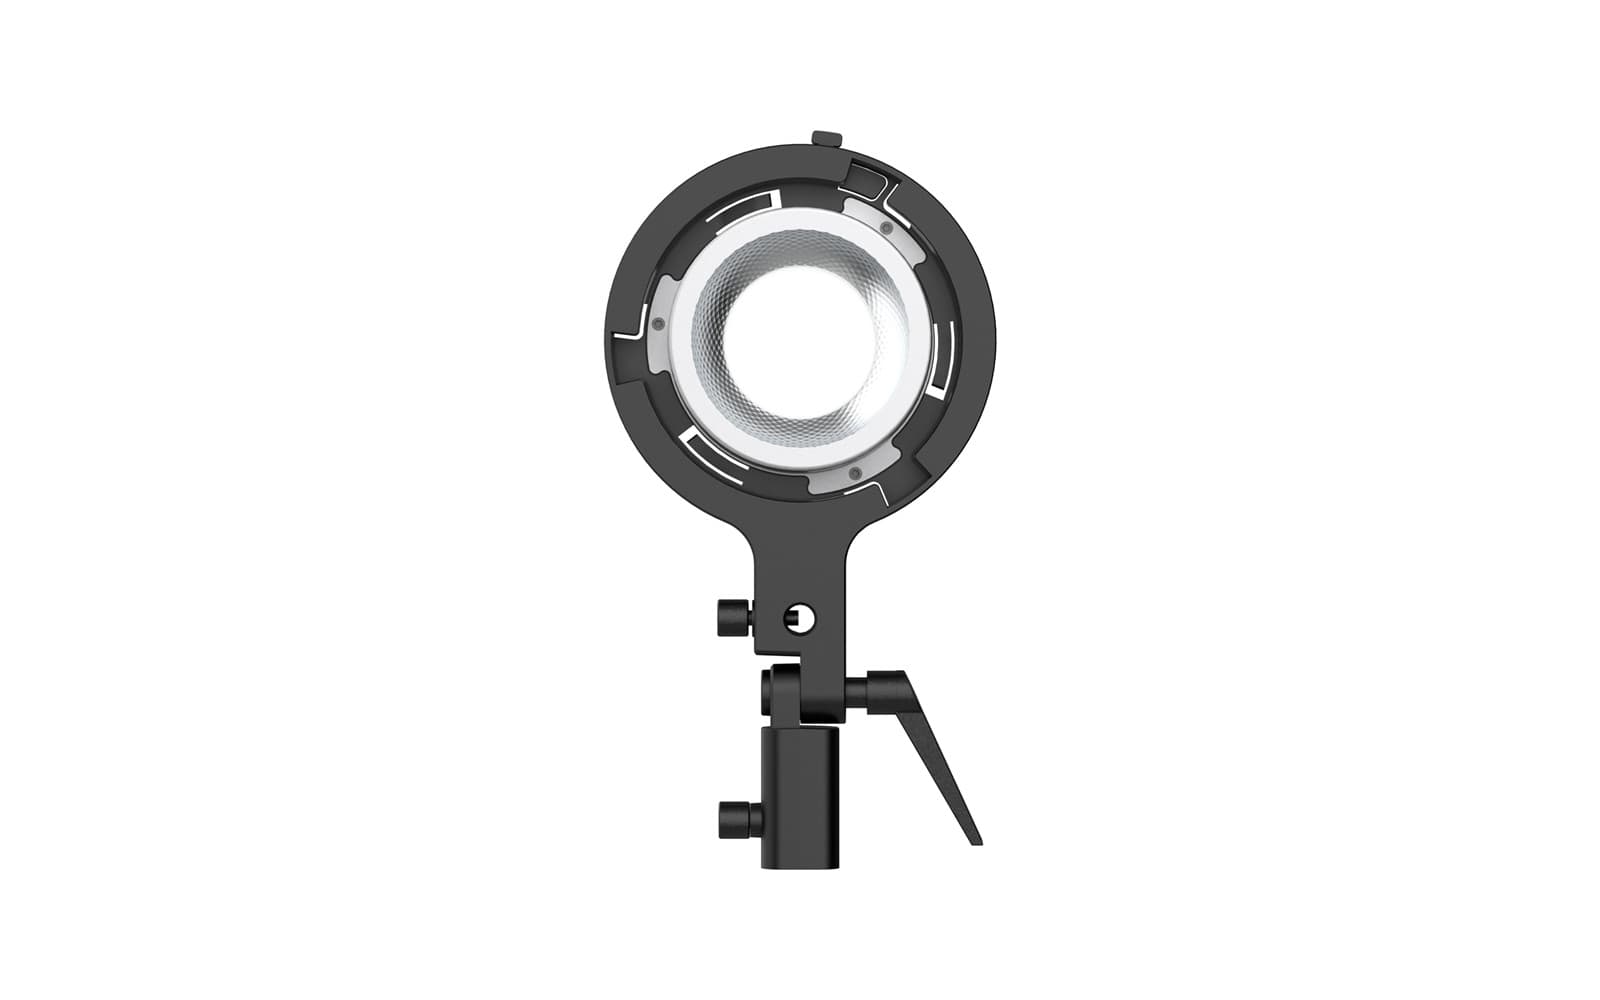 COLBOR MAR is a light mount adapter coming with a reflector, holding & mounting base, and angle-adjusted handle.